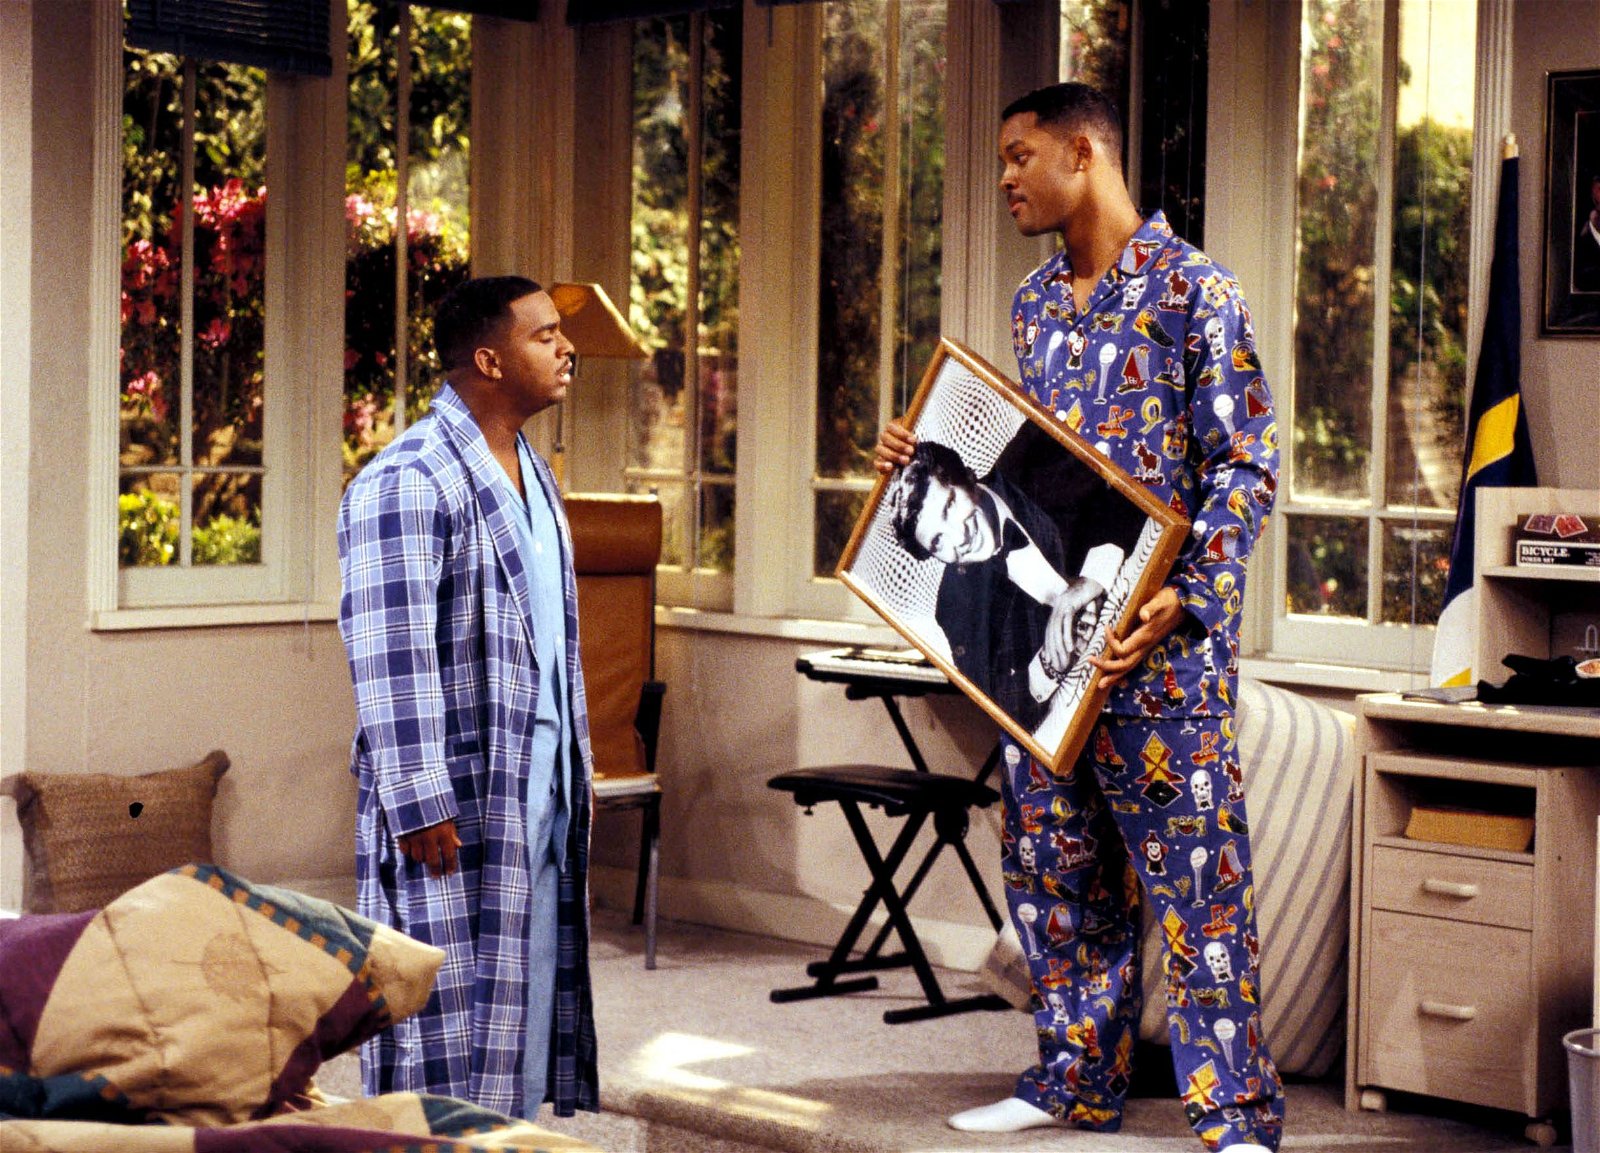 A still from Fresh Prince of Bel-Air featuring Will Smith and Alfonso Ribeiro